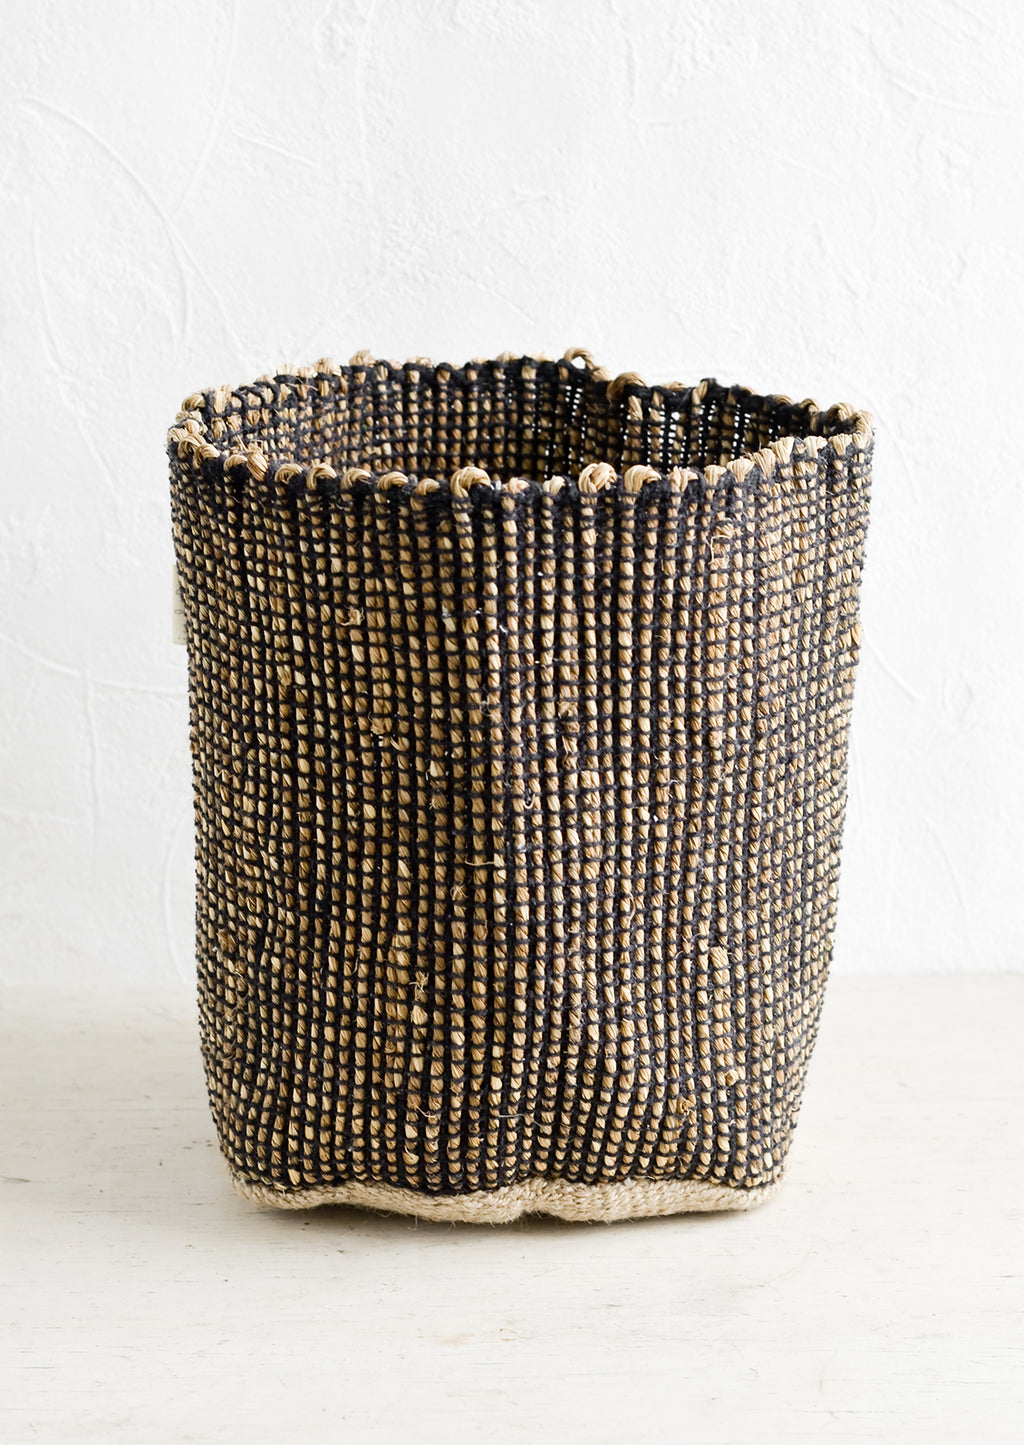 Black: A soft sided storage bin made from black & natural seagrass.